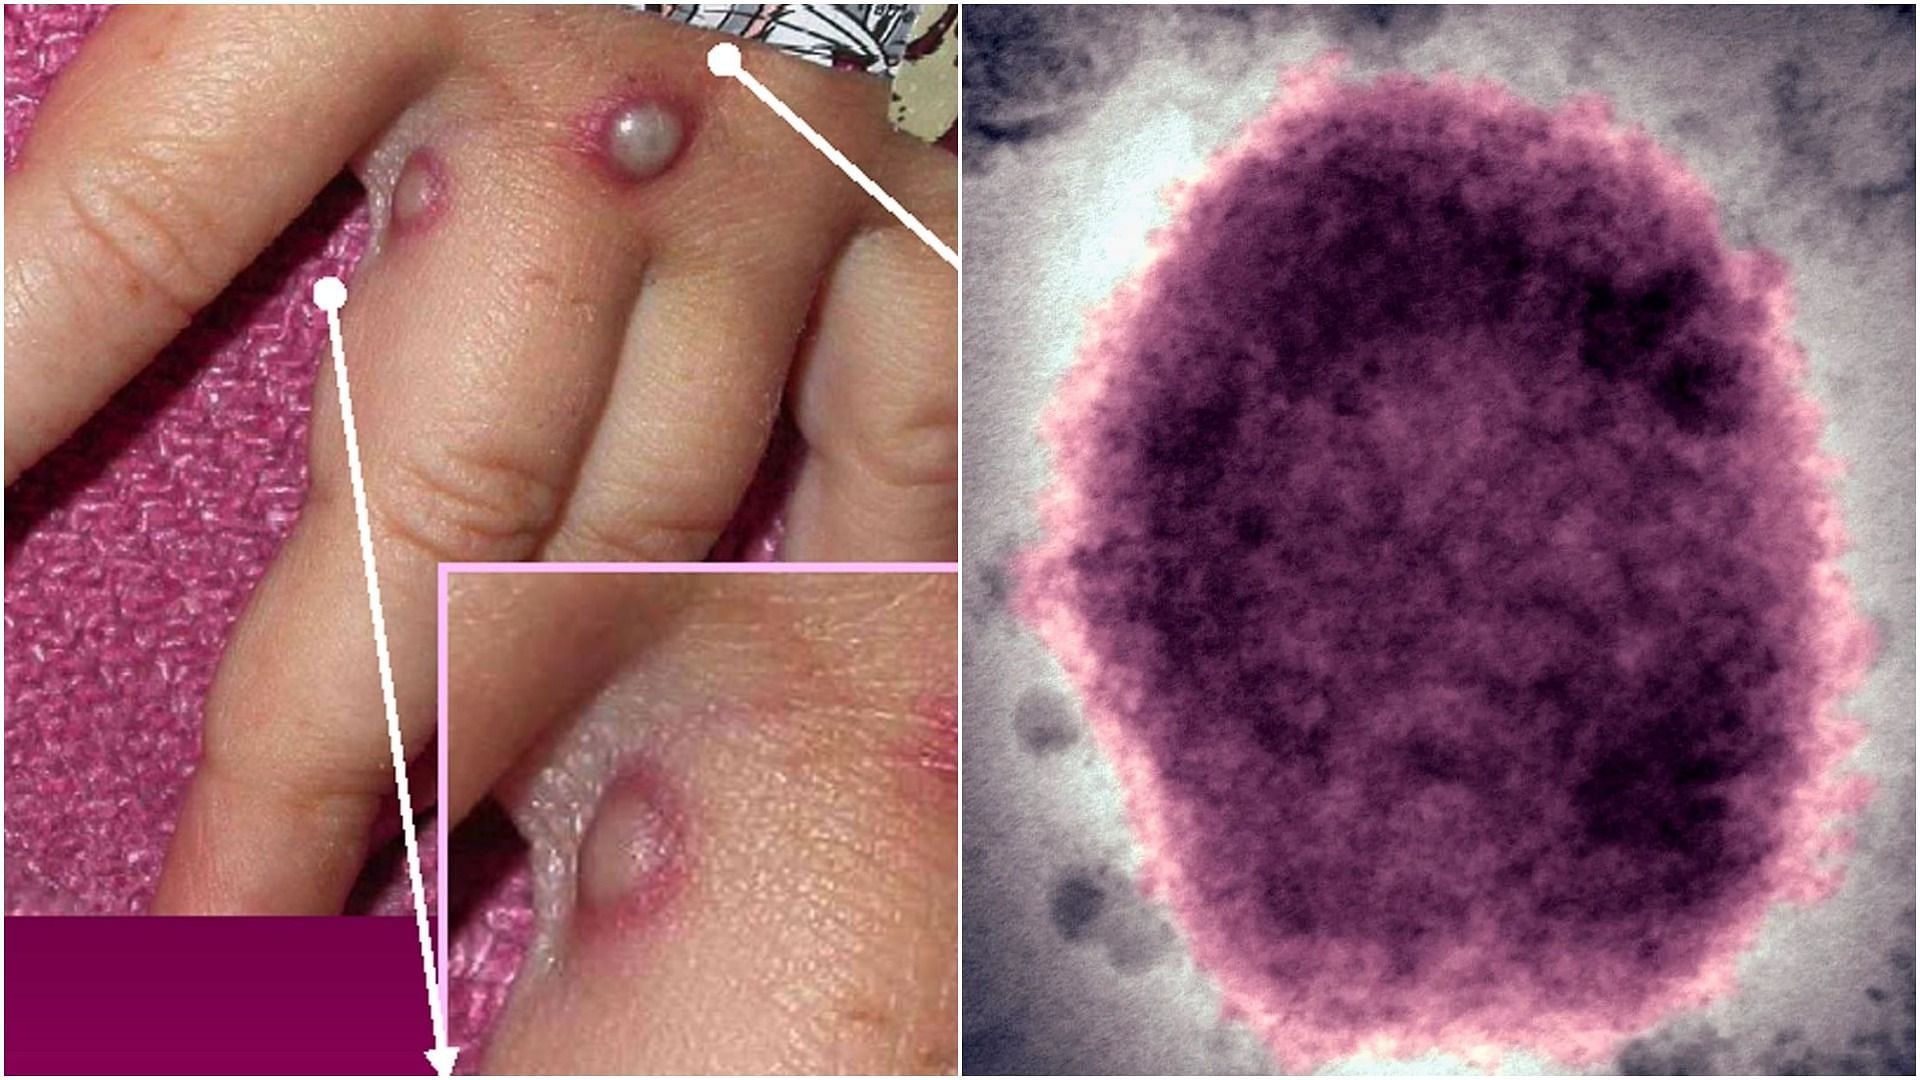 Bumps caused by MPV (Image via Getty Images, and Universal Images Group/Getty Images)